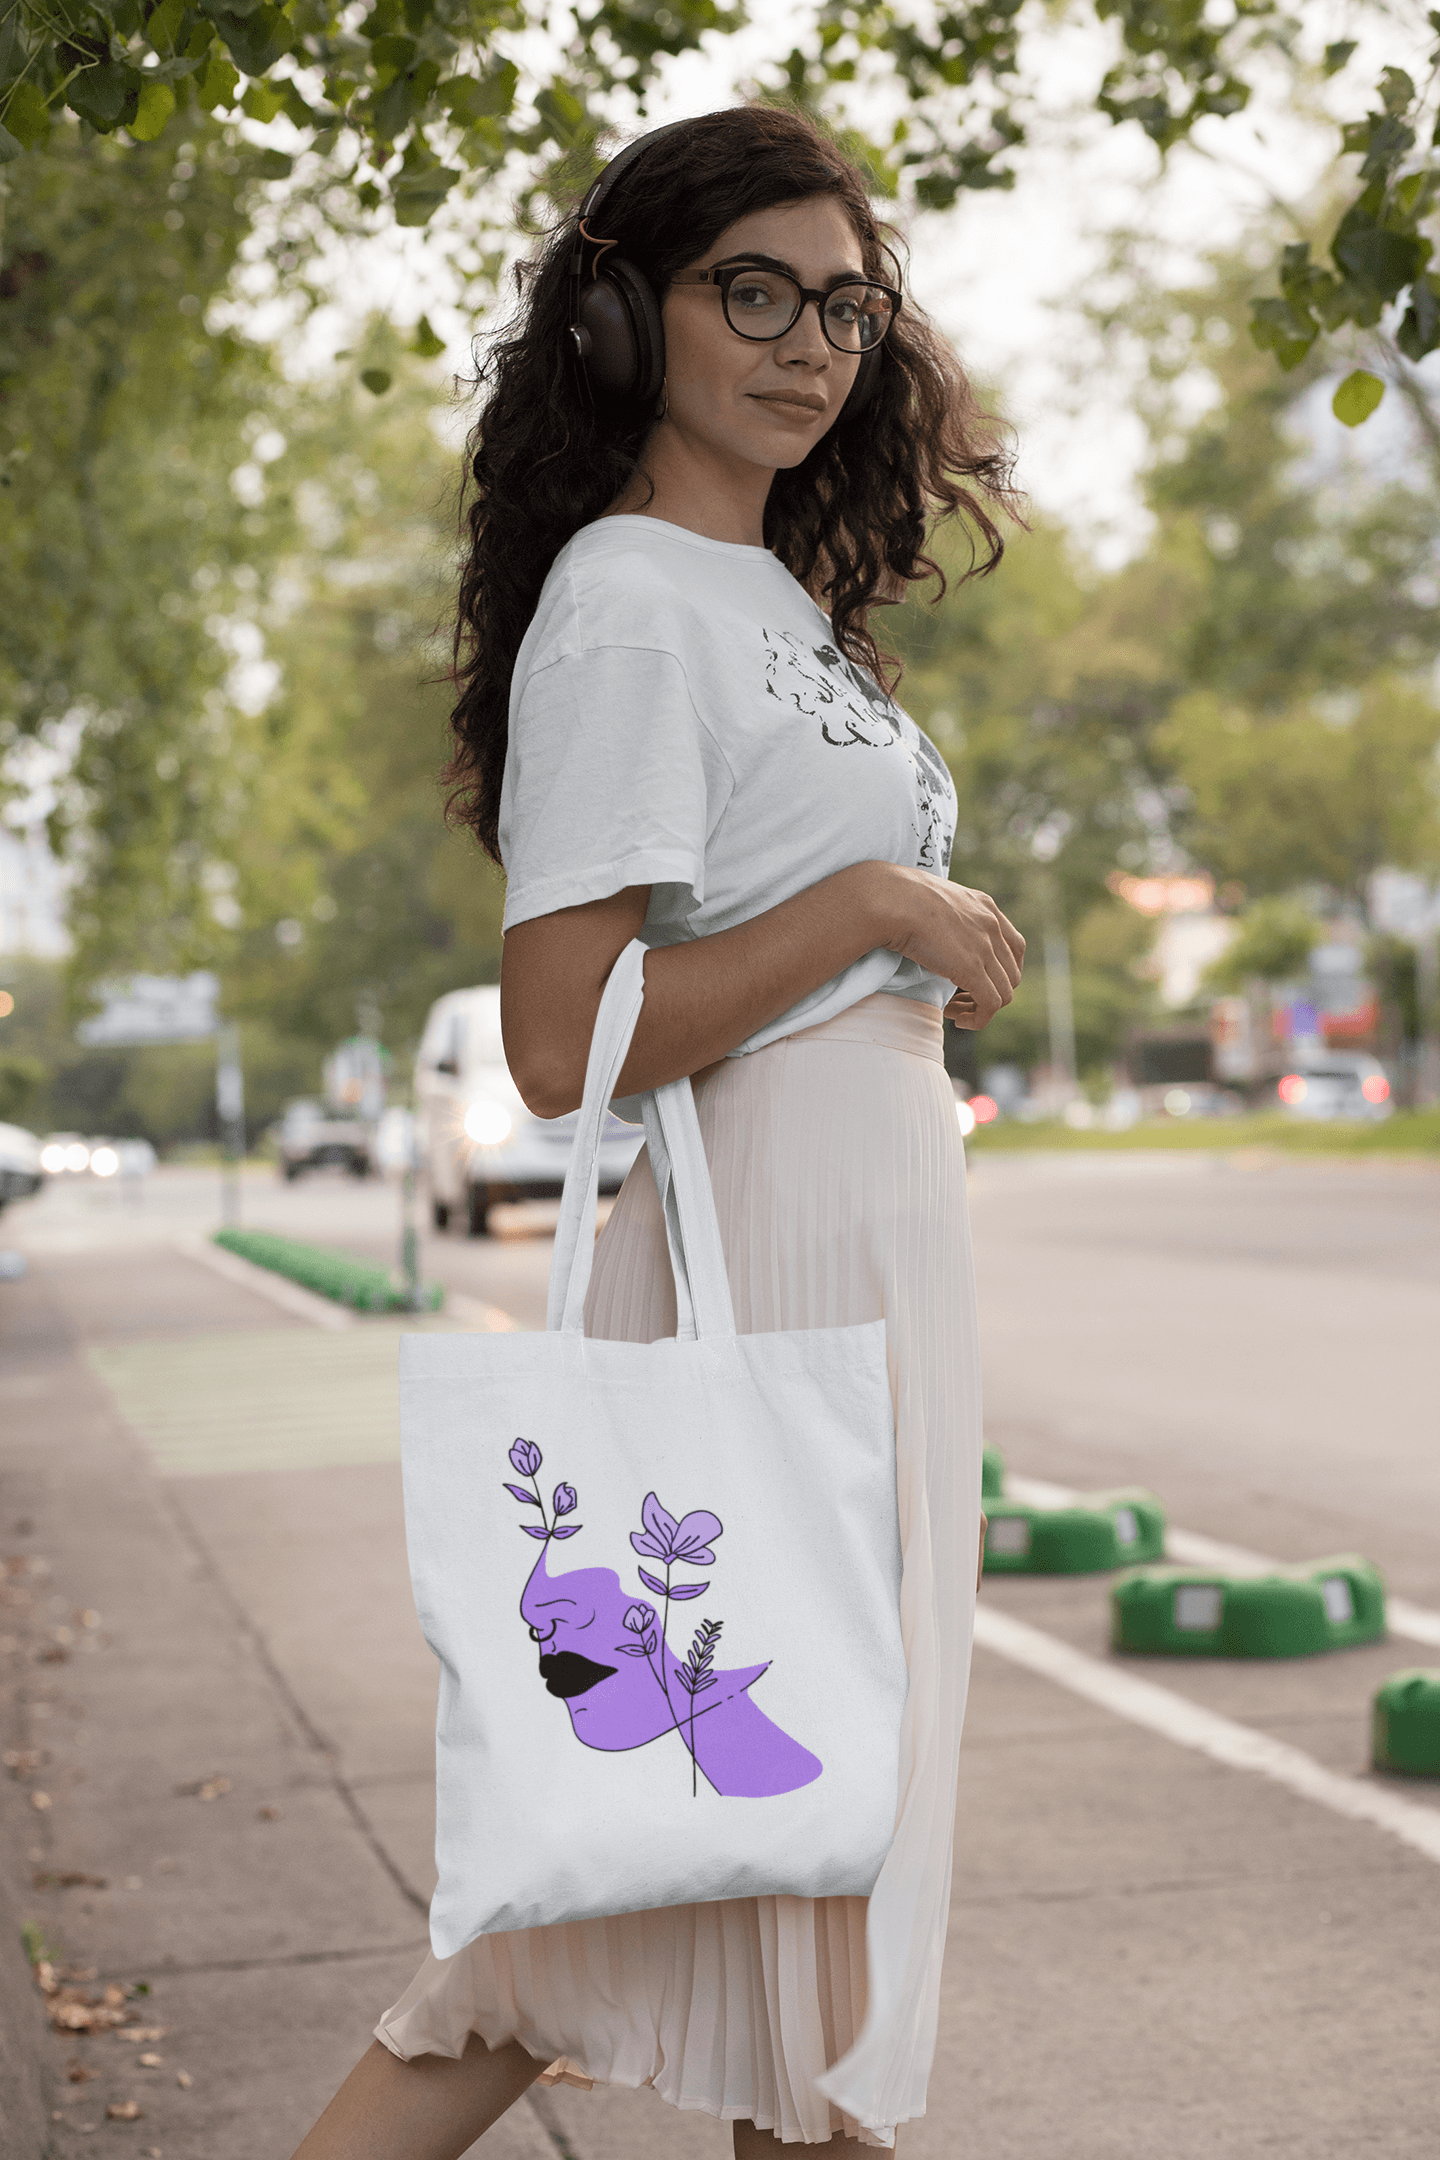 Lavender Love Tote Bag - The Accessorys Official